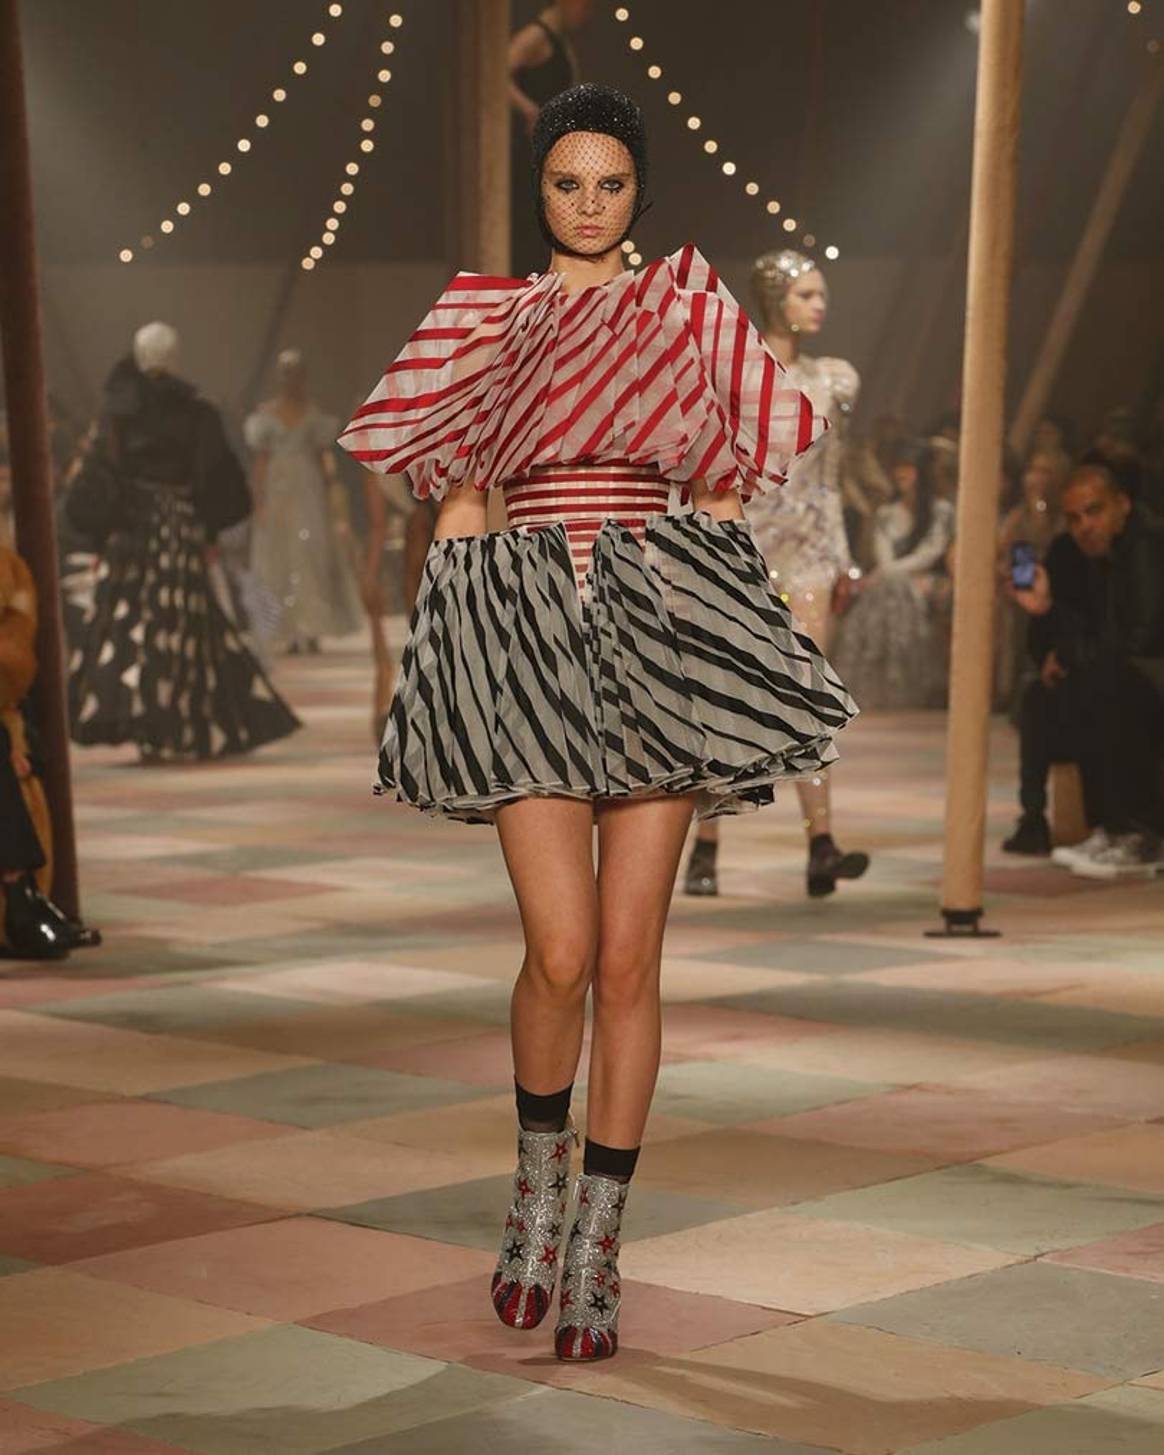 Fashion rolls up for Dior's chic strongwoman circus